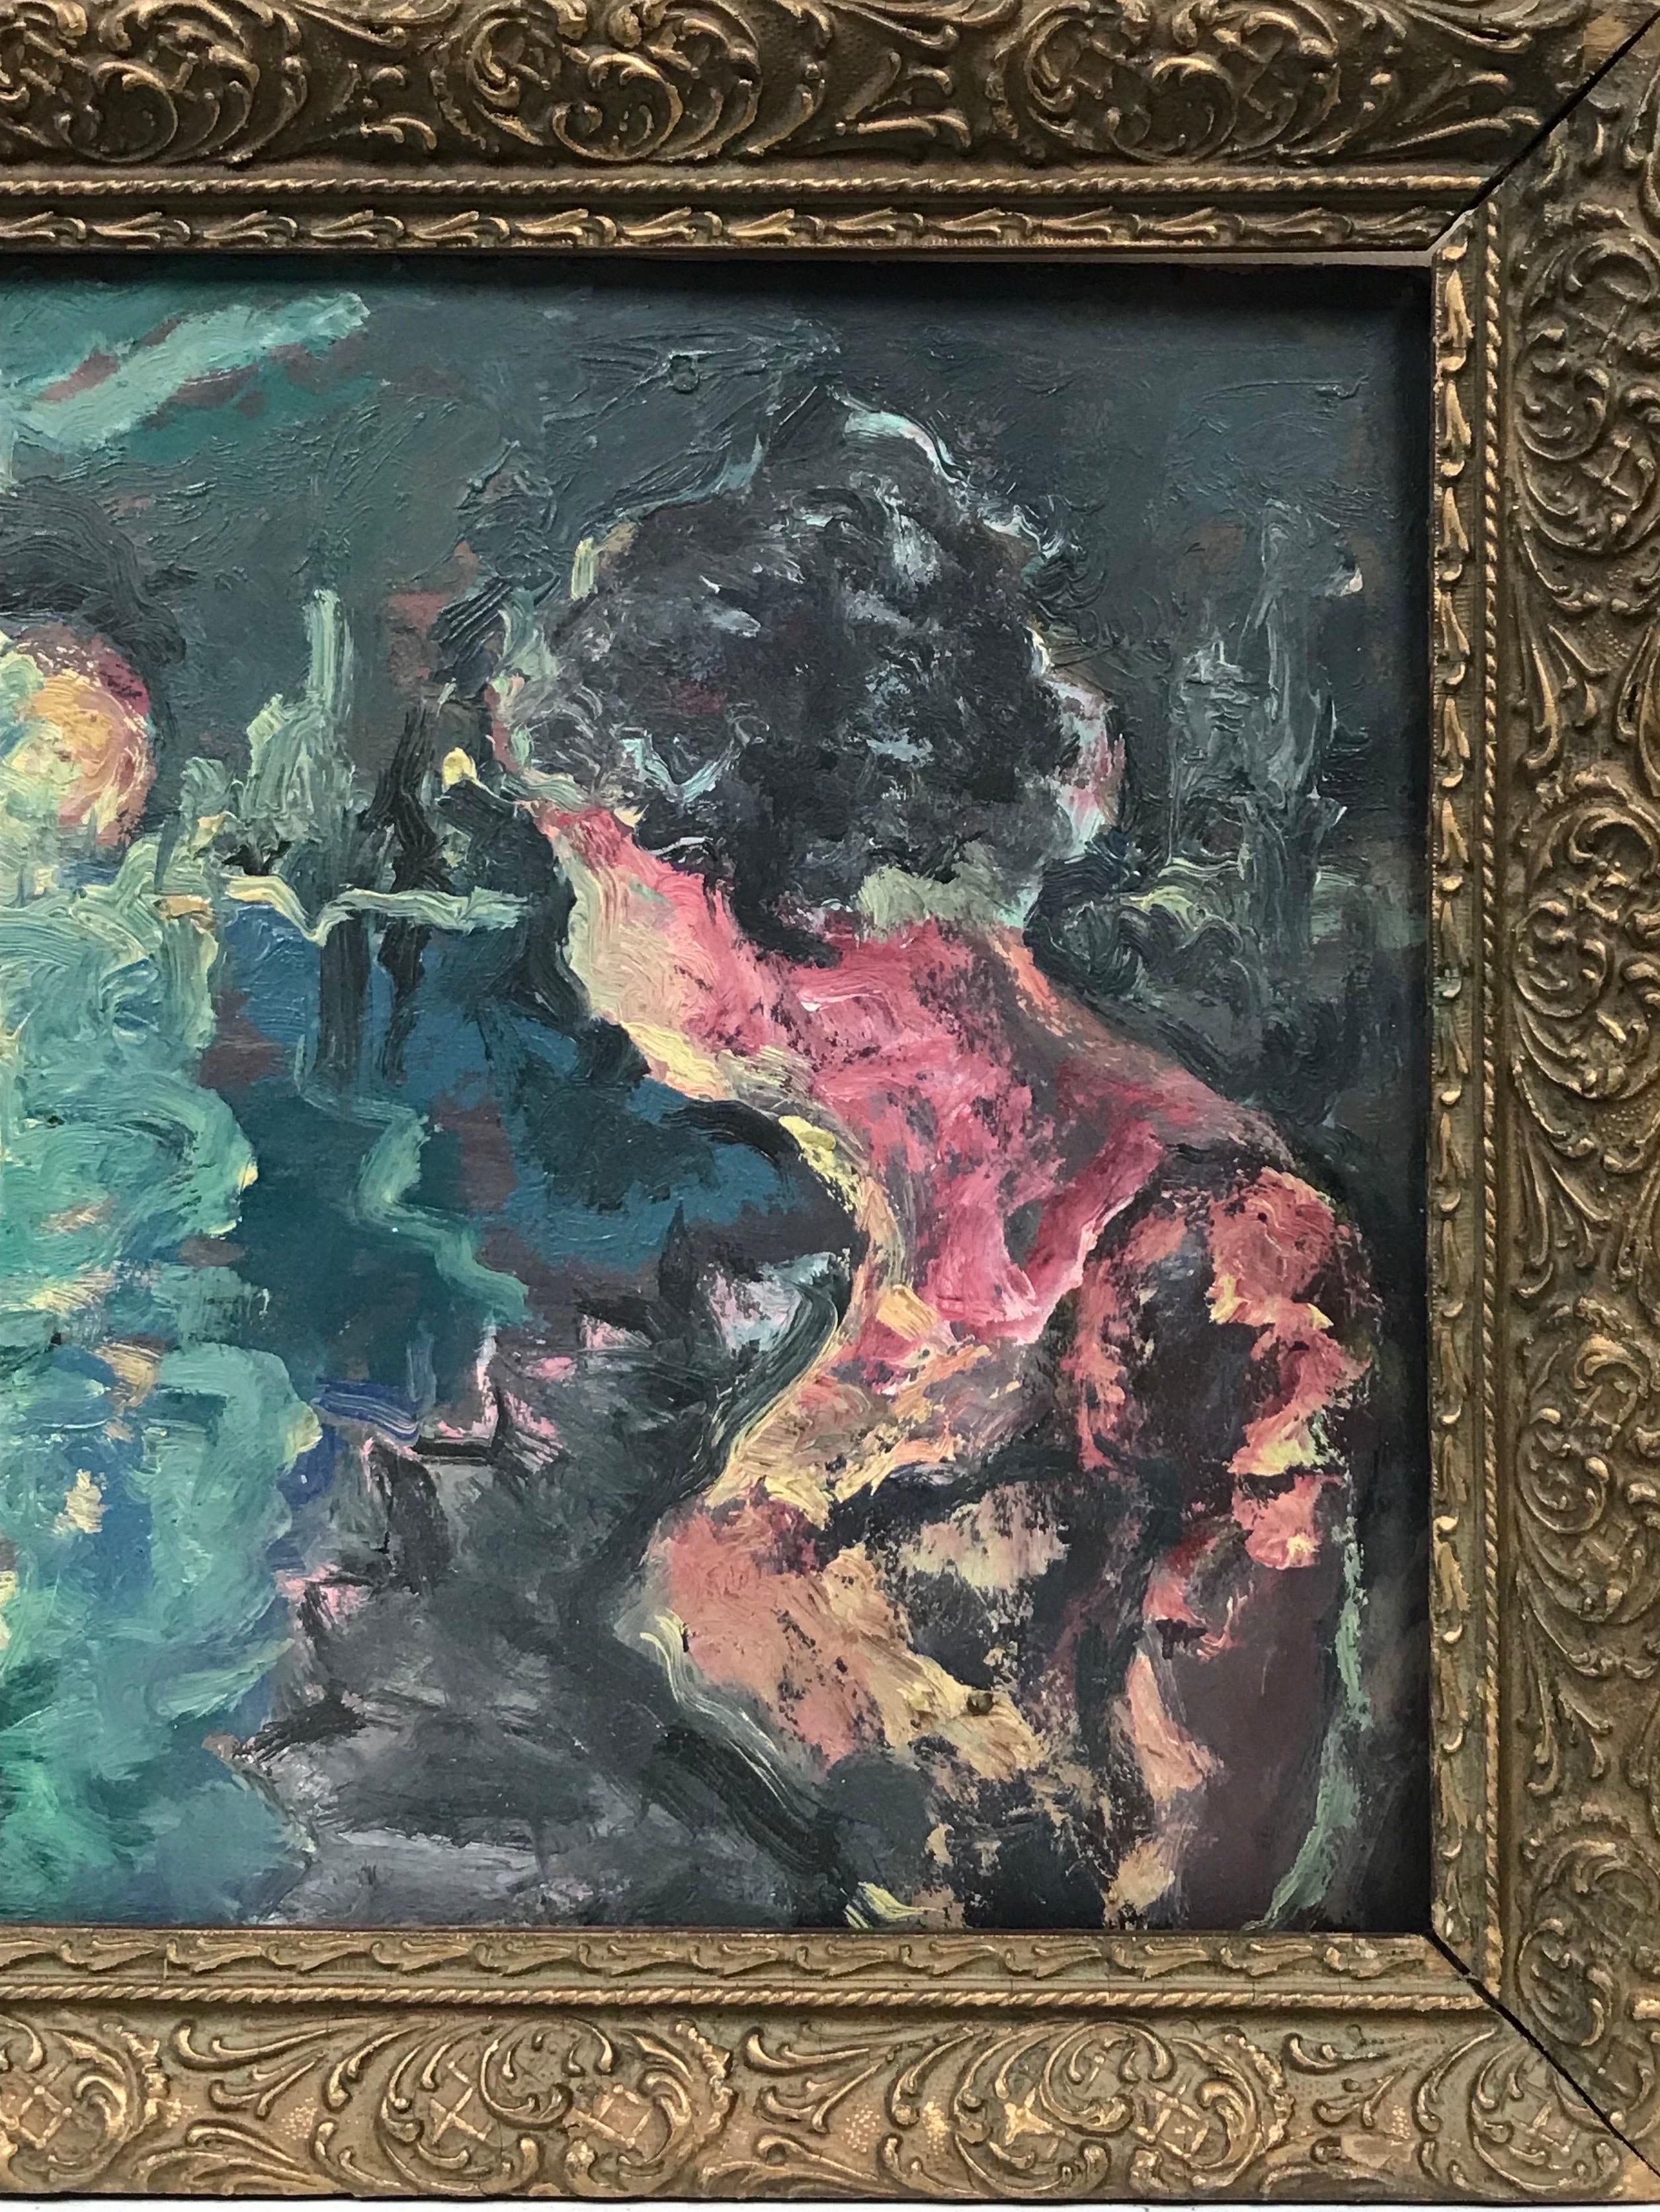 Artist/ School: French School, circa 1950's

Title: an expressionist painting depicting an elegant lady overlooking a moonlit lake view. 

Medium: oil on board, framed 

Framed: 13 x 15 inches
Board: 10.5 x 11.75 inches

Provenance: private